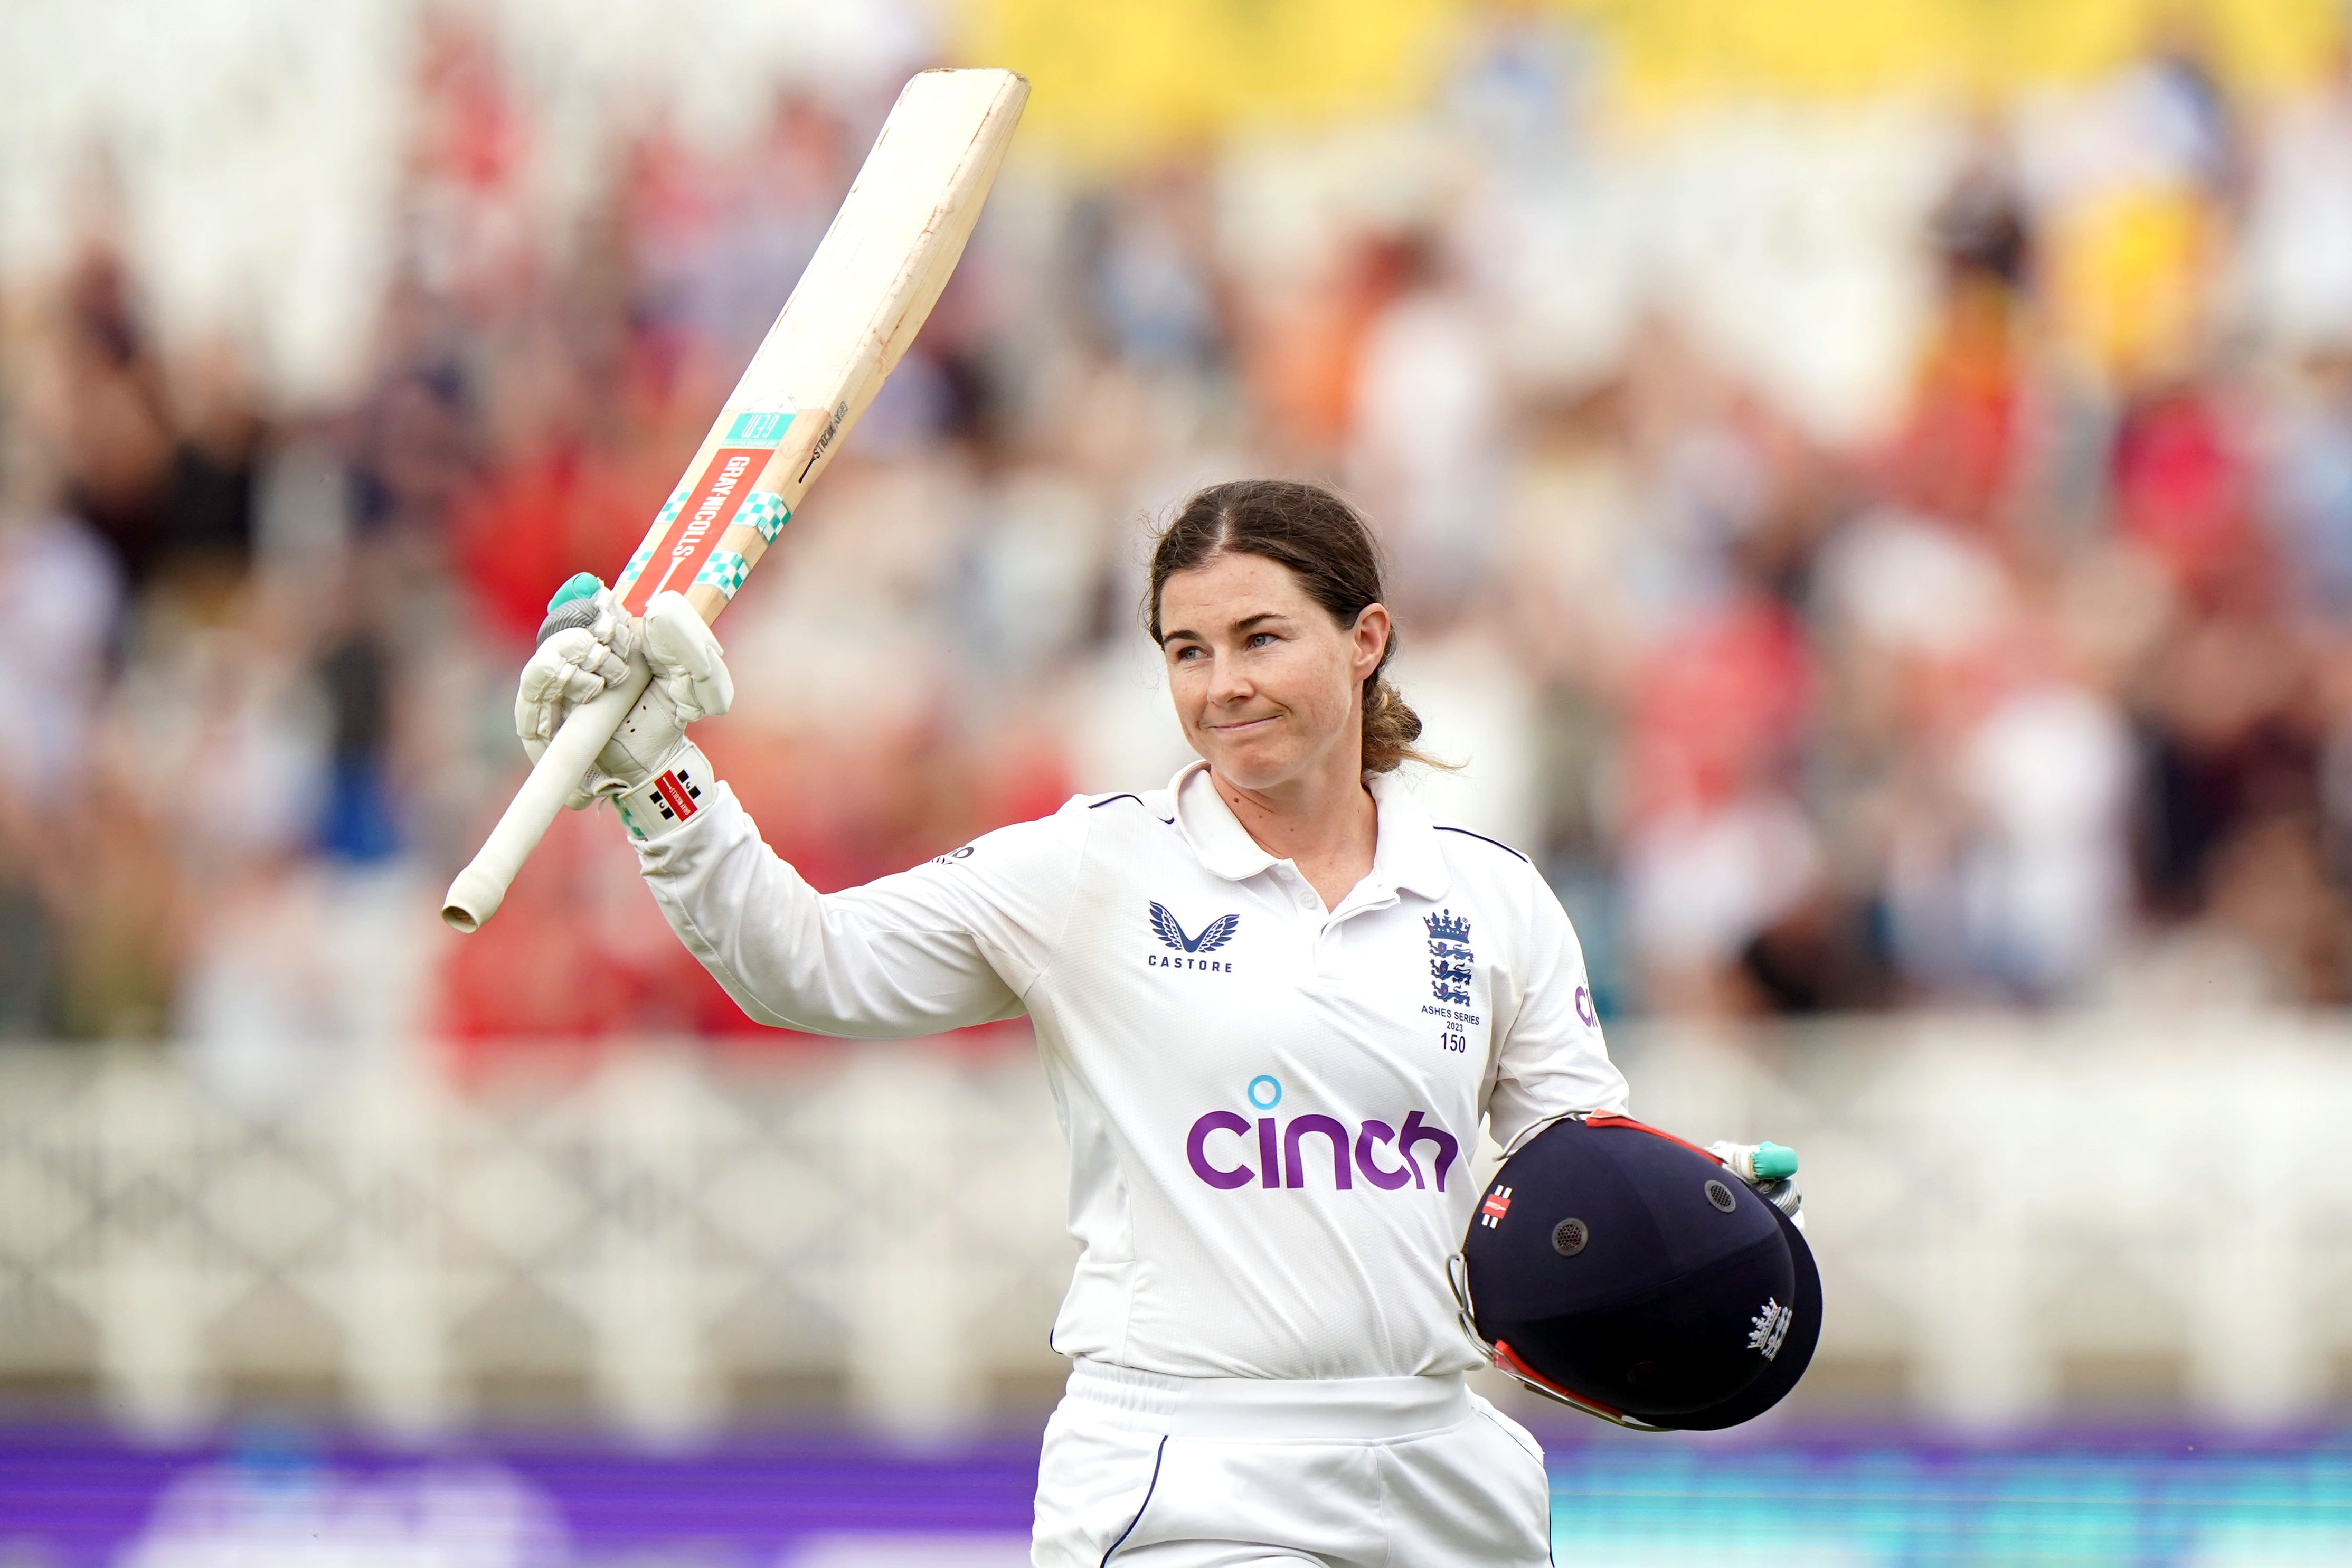 Beaumont had a couple of let-offs in reaching three figures but was seldom troubled when she resumed on 100 on Saturday